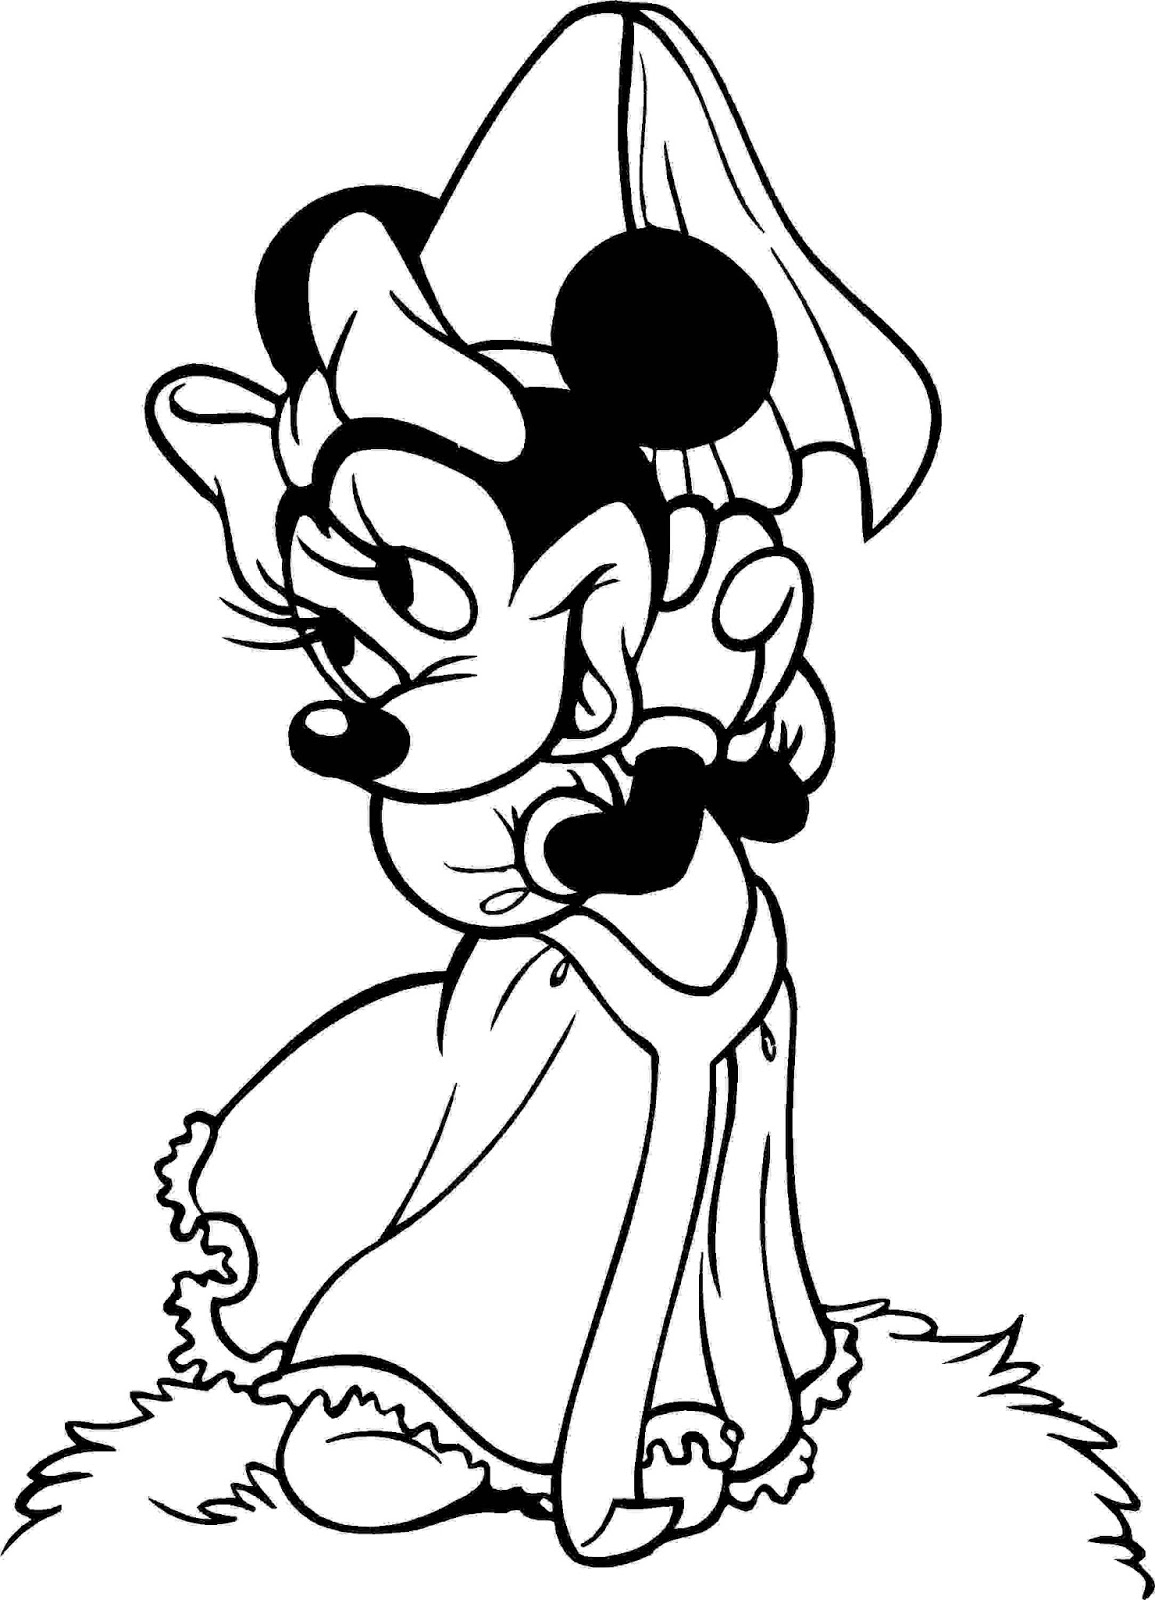 minnie mouse coloring pages free free disney minnie mouse coloring pages pages mouse coloring minnie free 